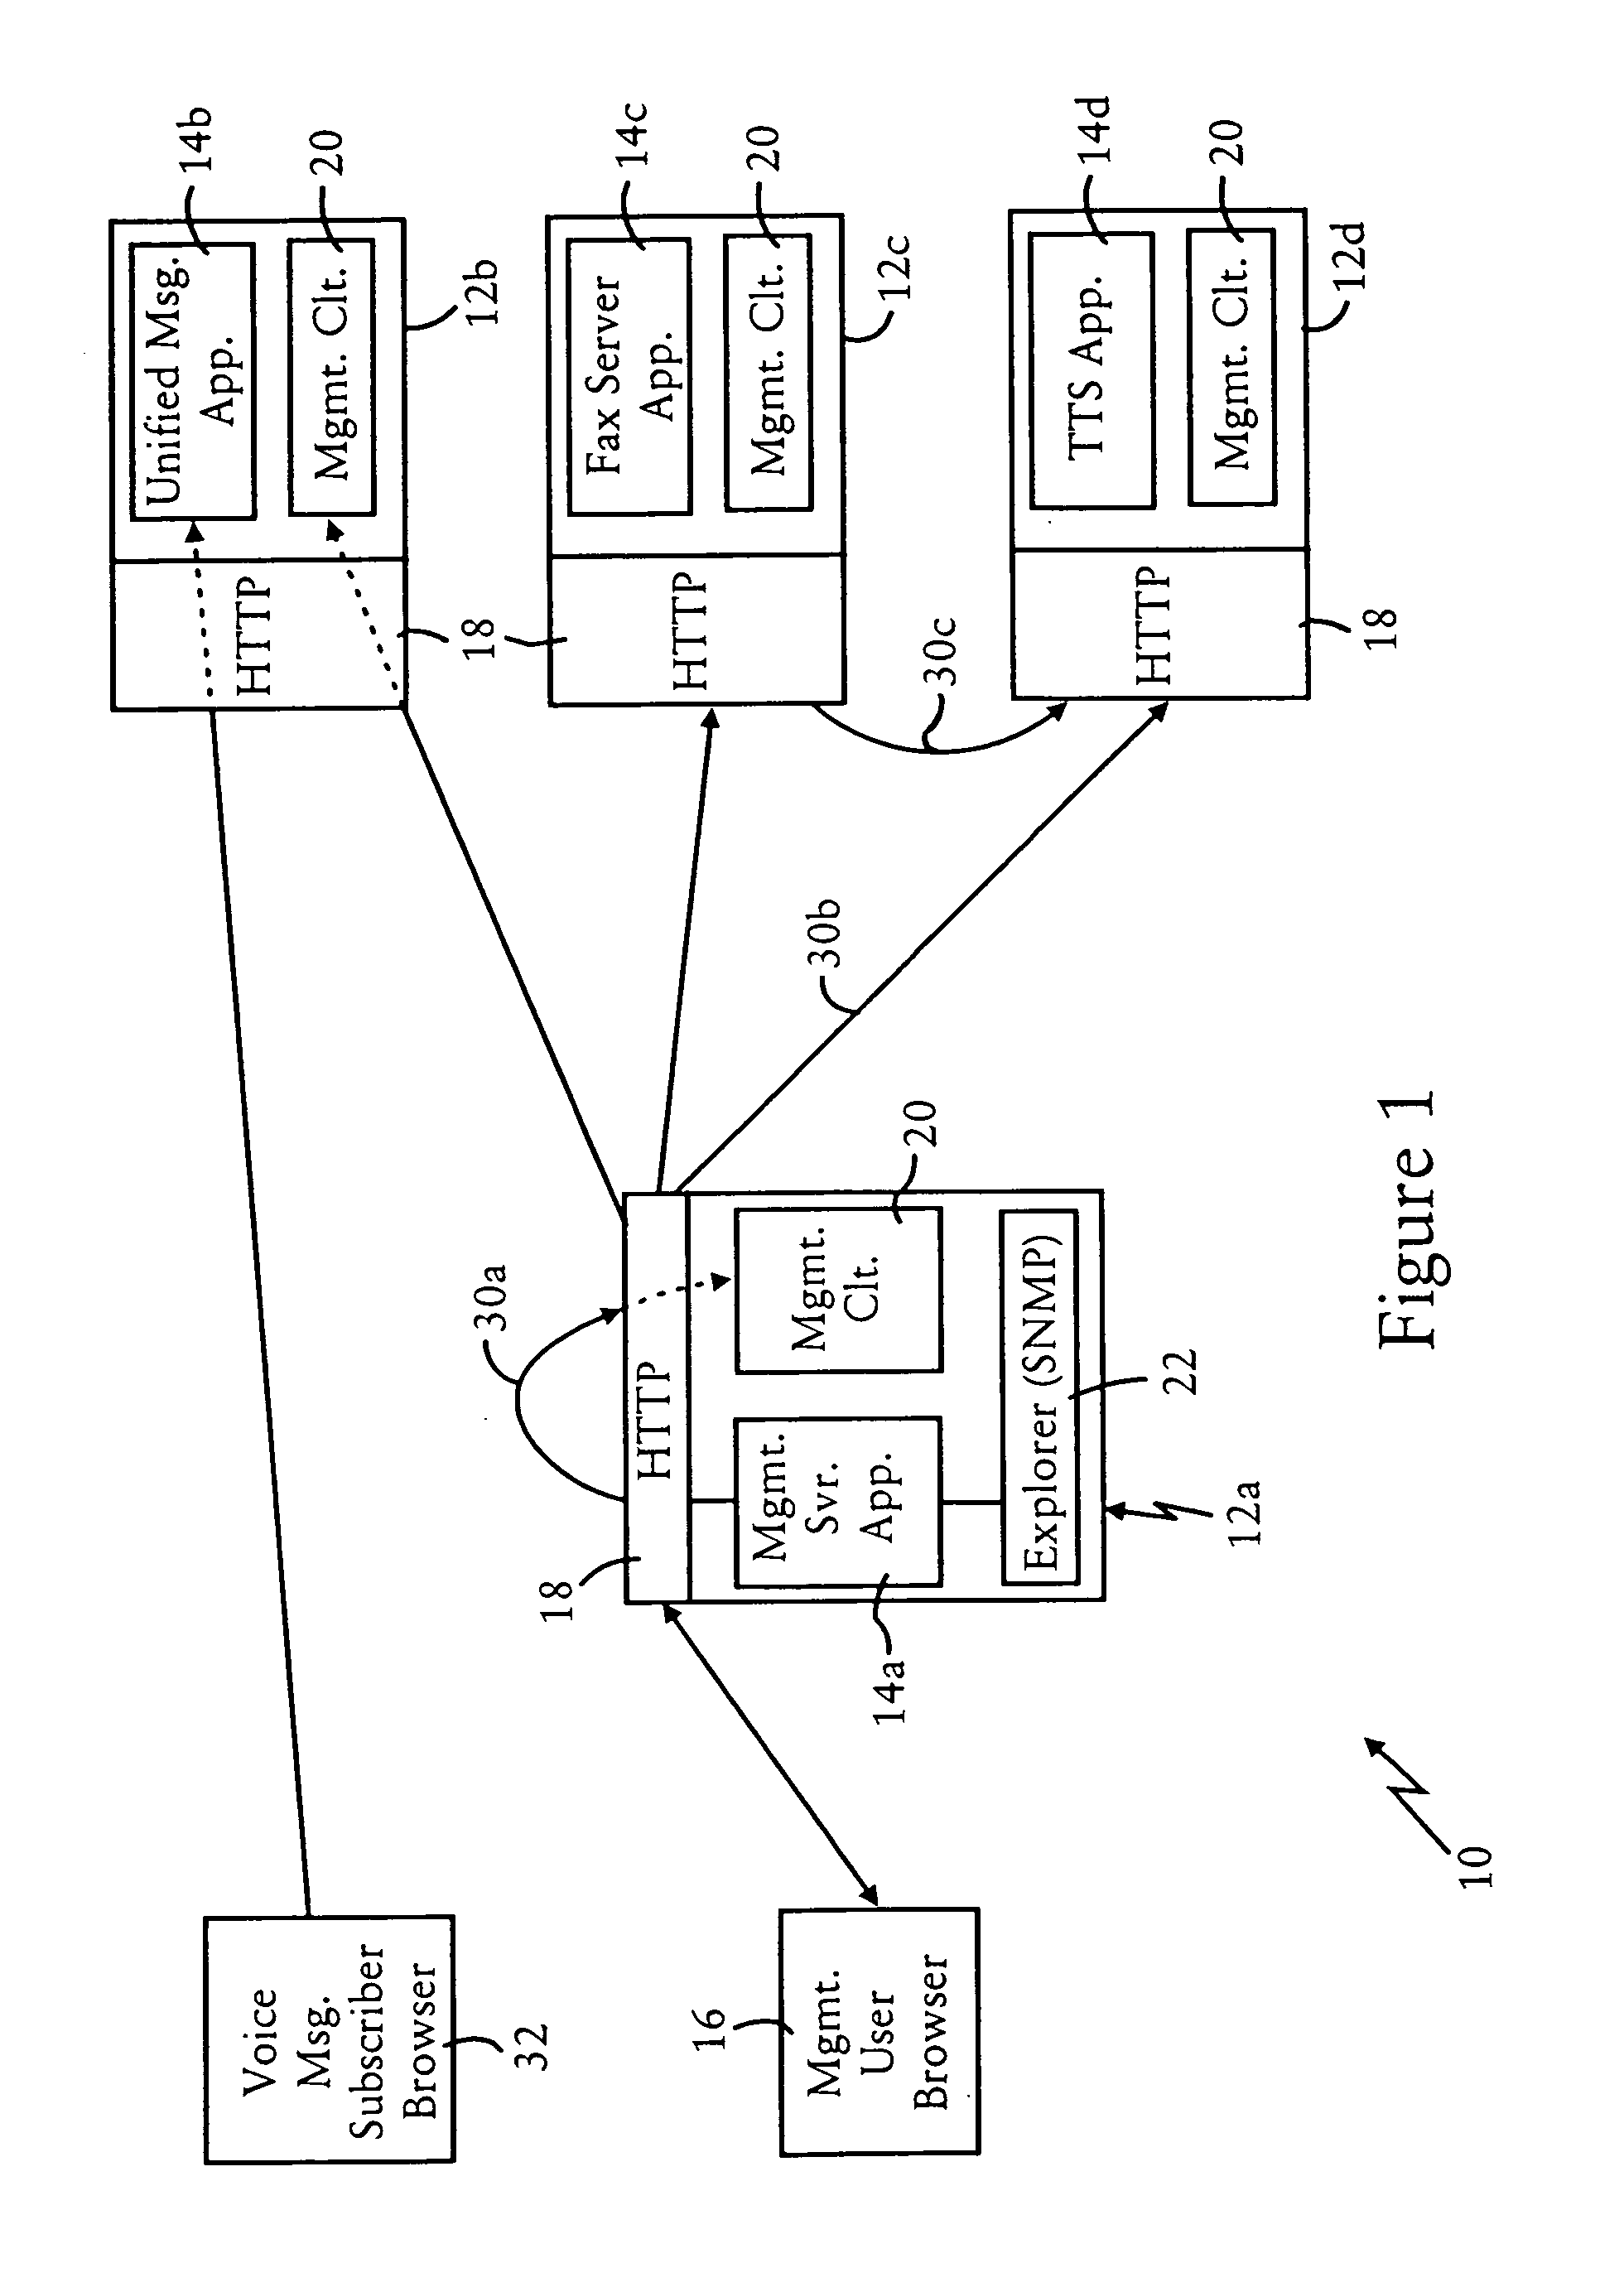 Web based management of host computers in an open protocol network